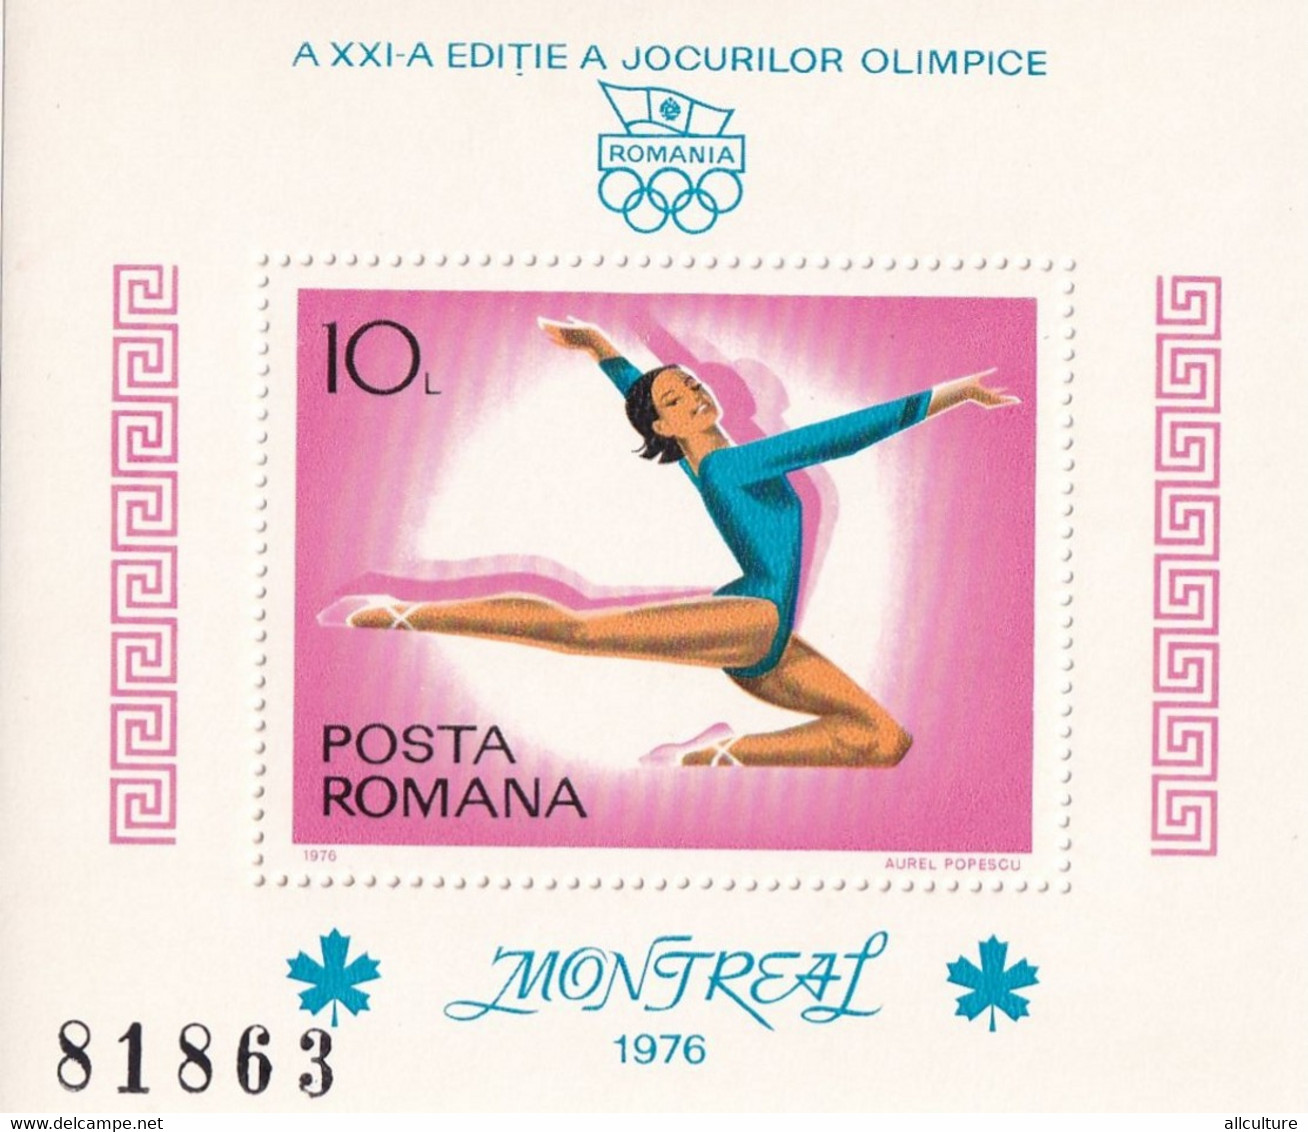 MONTREAL 1976 OLIMPIC GAMES ROMANIA BLOCK 1976 MNH - Sommer 1976: Montreal